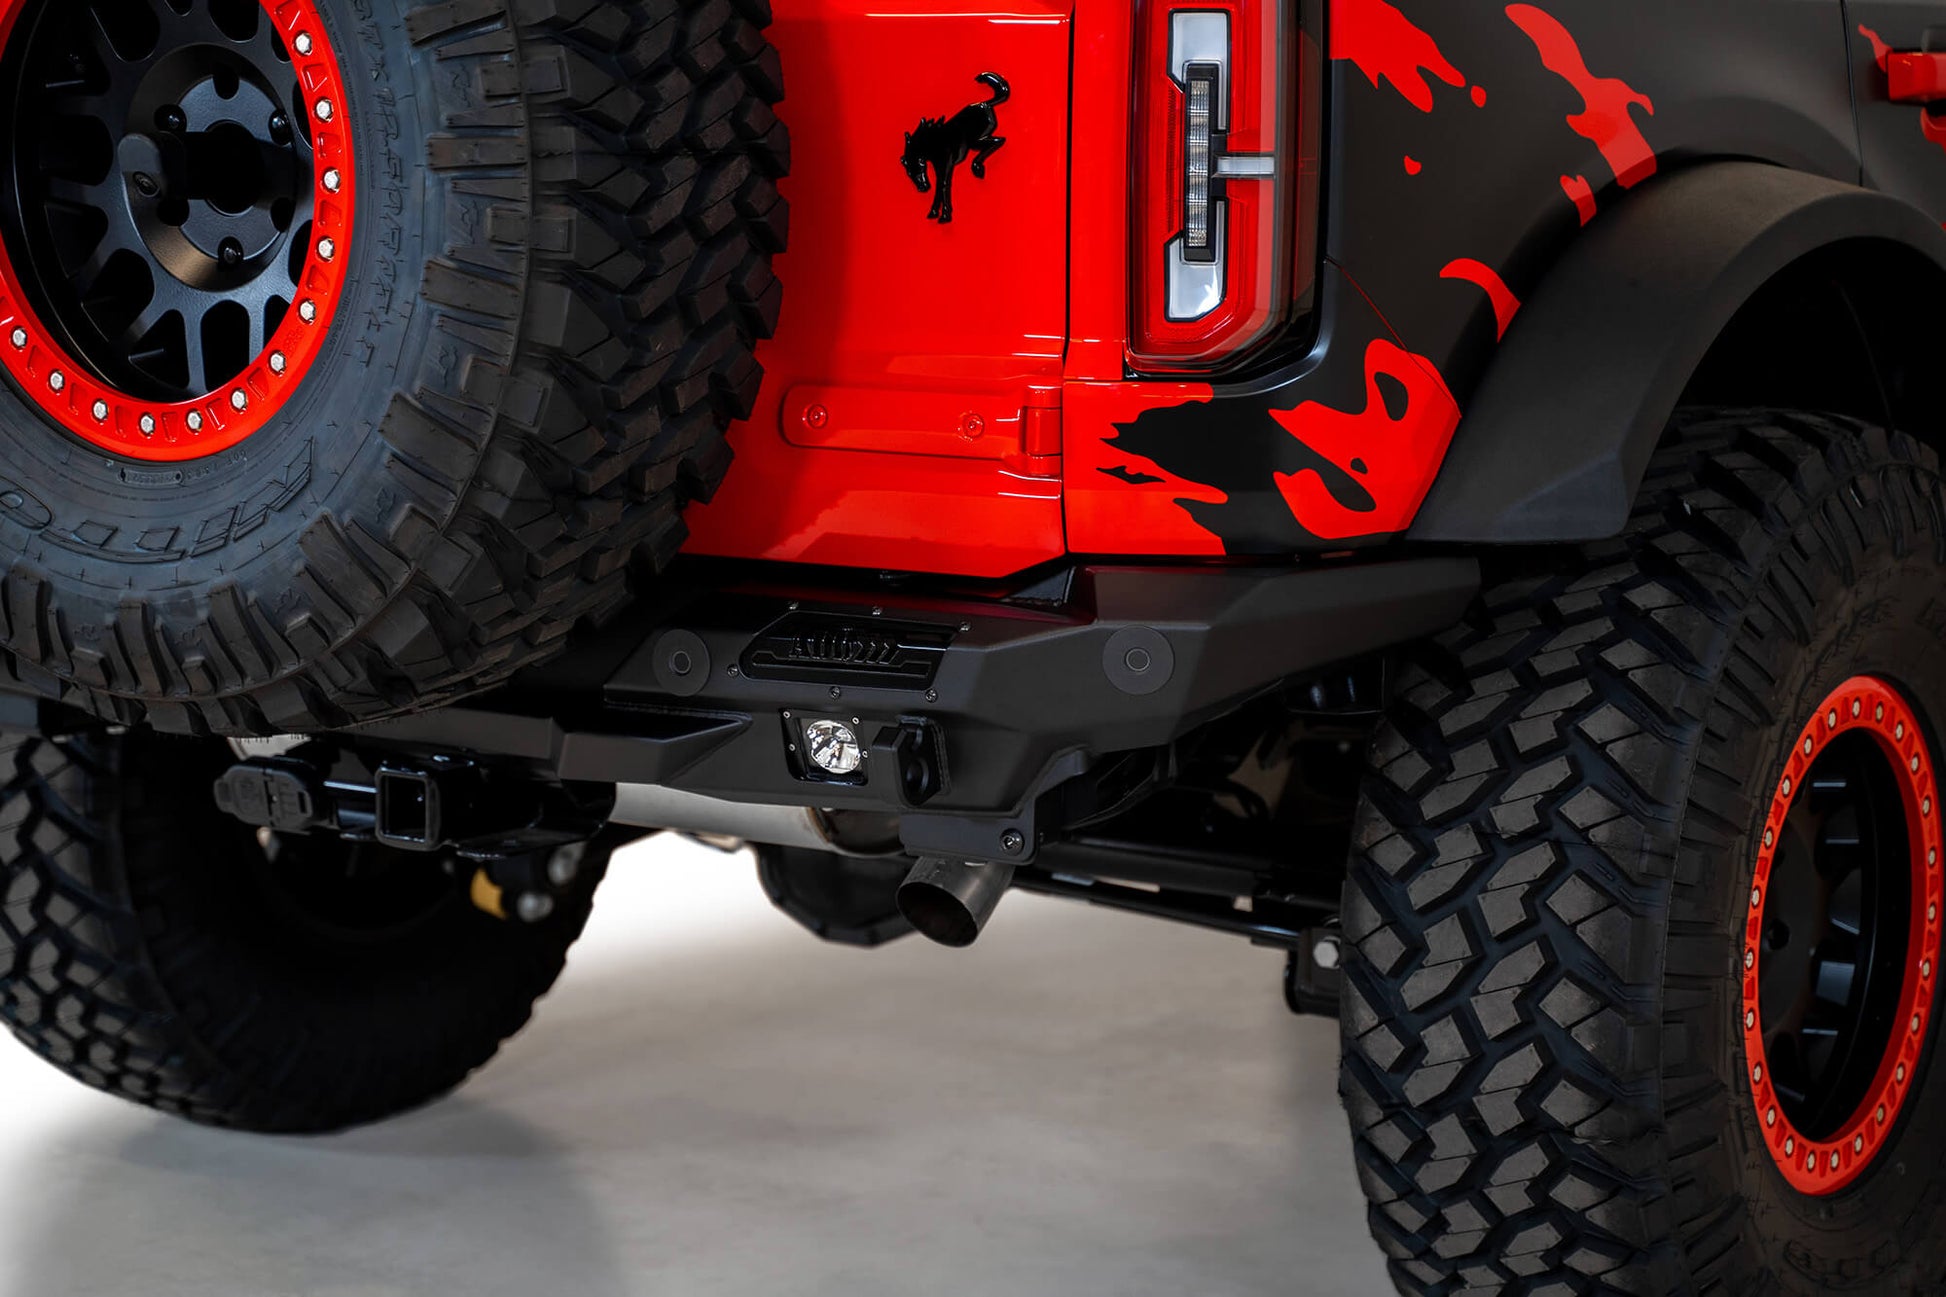 Installed on Car ADD Ford Stealth Fighter Rear Bumper | 2021-2023 Bronco